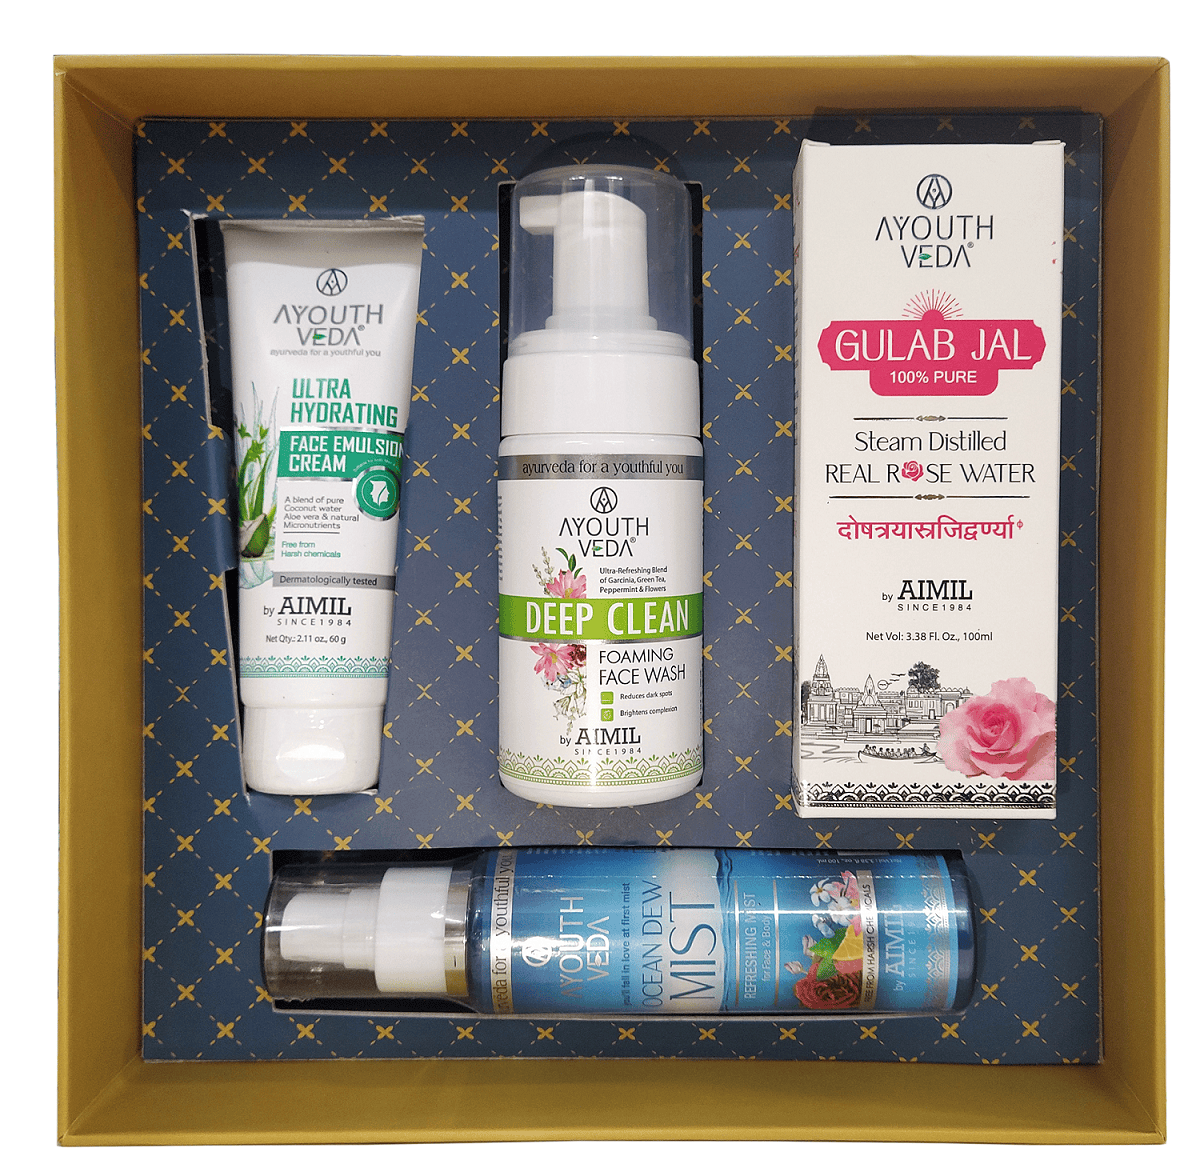 Archies | Archies Ayouthveda Advance Skin Hydrating Gift Set (Ultra Hydrating Face Emulsion Cream, Deep Clean Foaming Face Wash, Ocean Dew Mist, Rose Water) 1